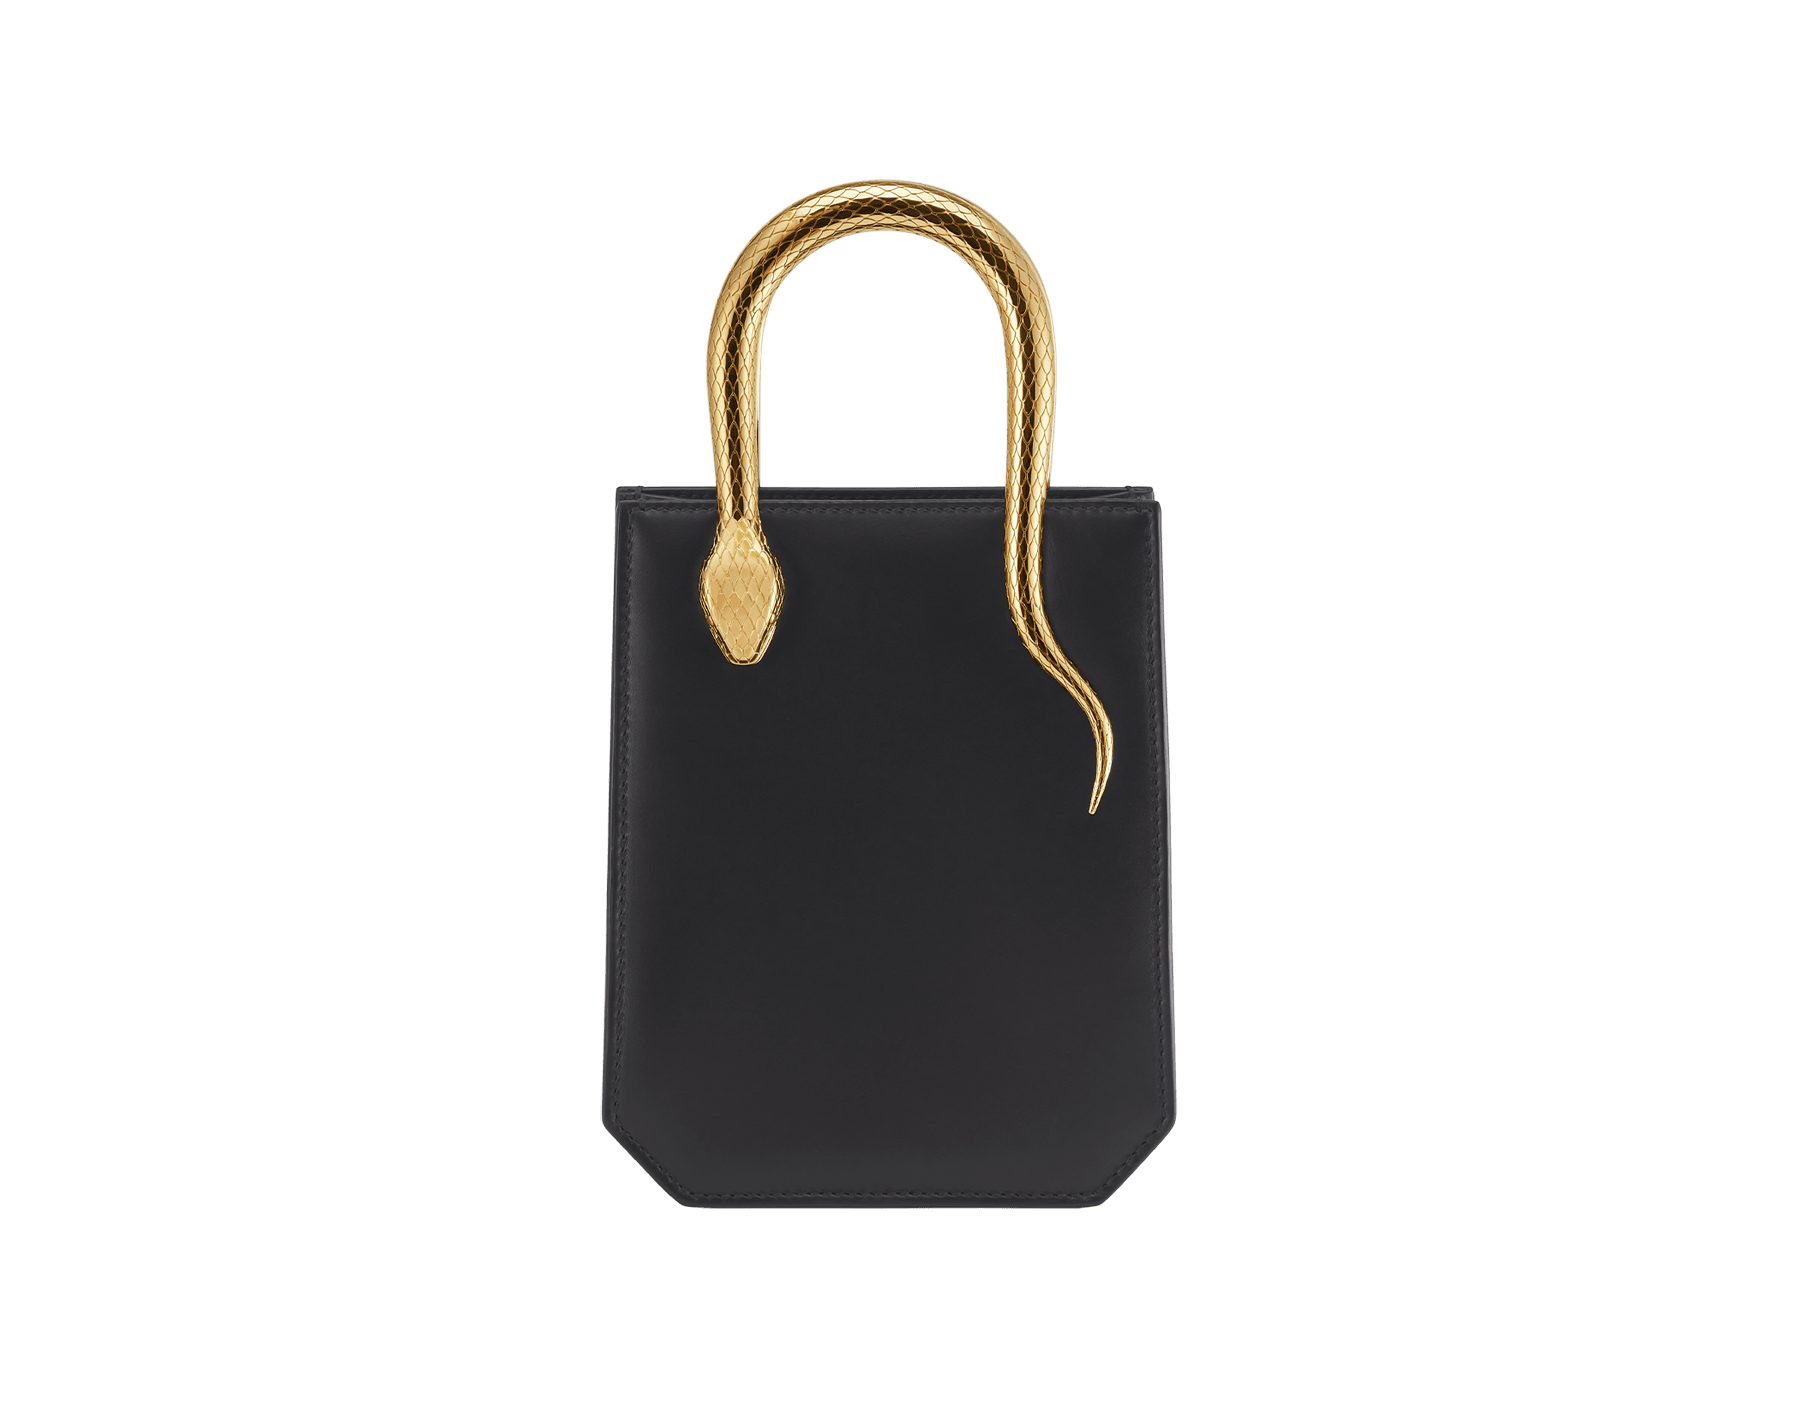 Serpentine mini tote bag in ivory opal Metropolitan calf leather with black nappa leather lining. Captivating snake body-shaped handles in gold-plated brass embellished with engraved scales and red enamel eyes. SEA-1223 image 1